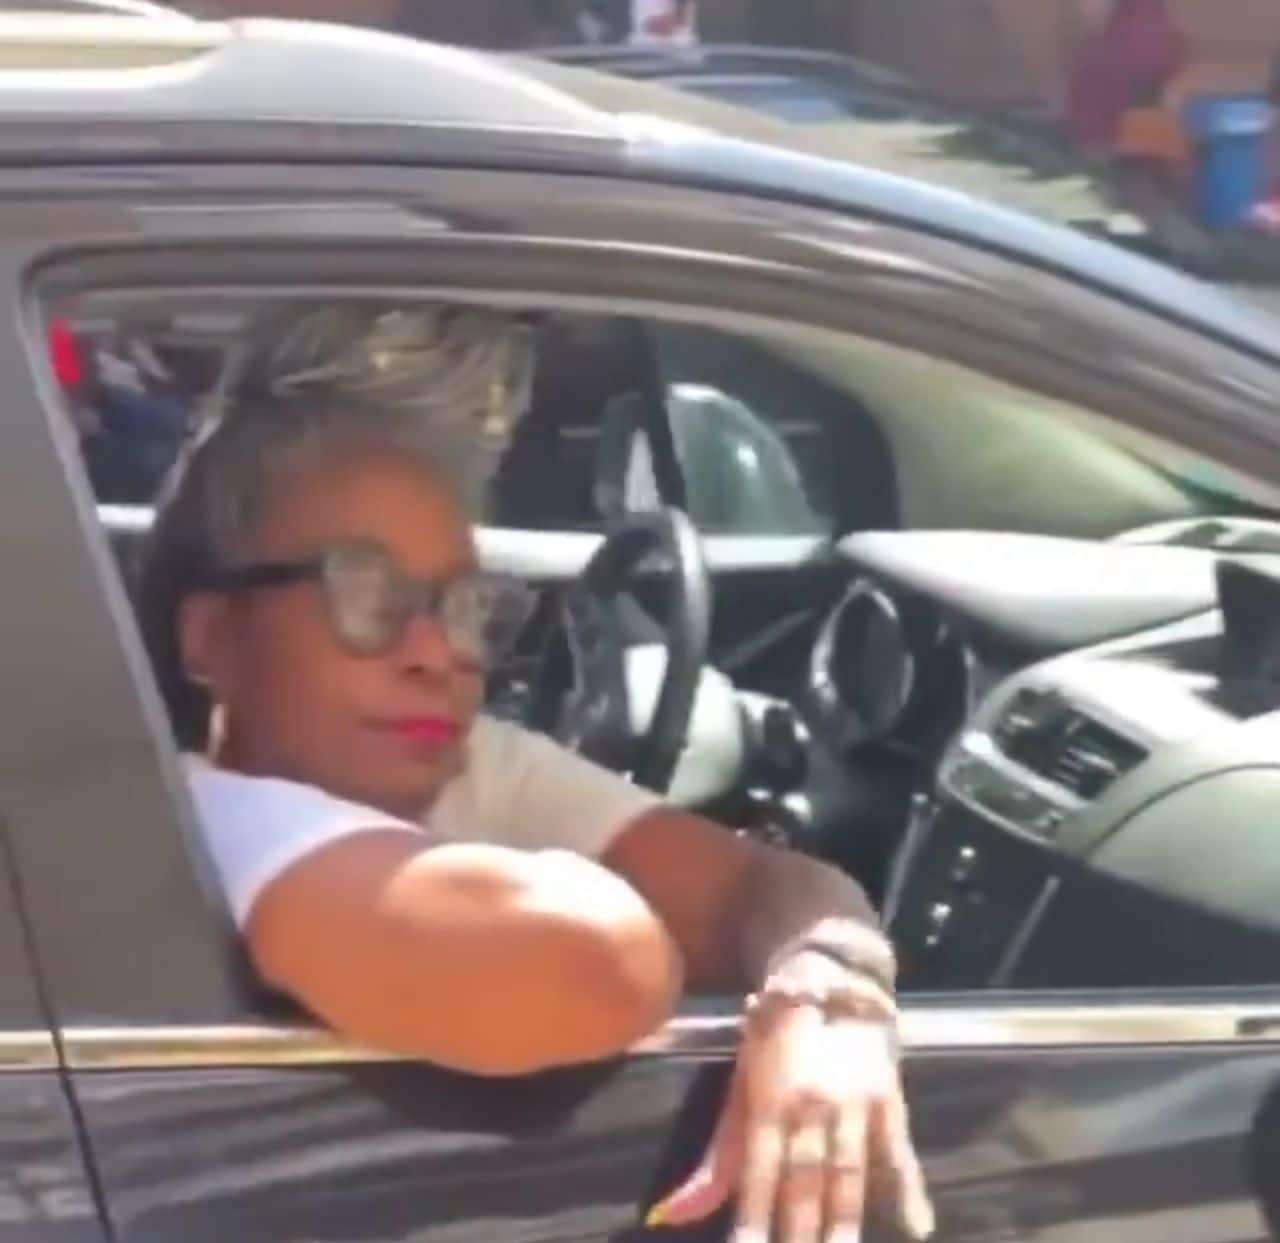 "I'm in his life now, why are you still here?" — Lady confronts mother-in-law over car's front seat (Video)